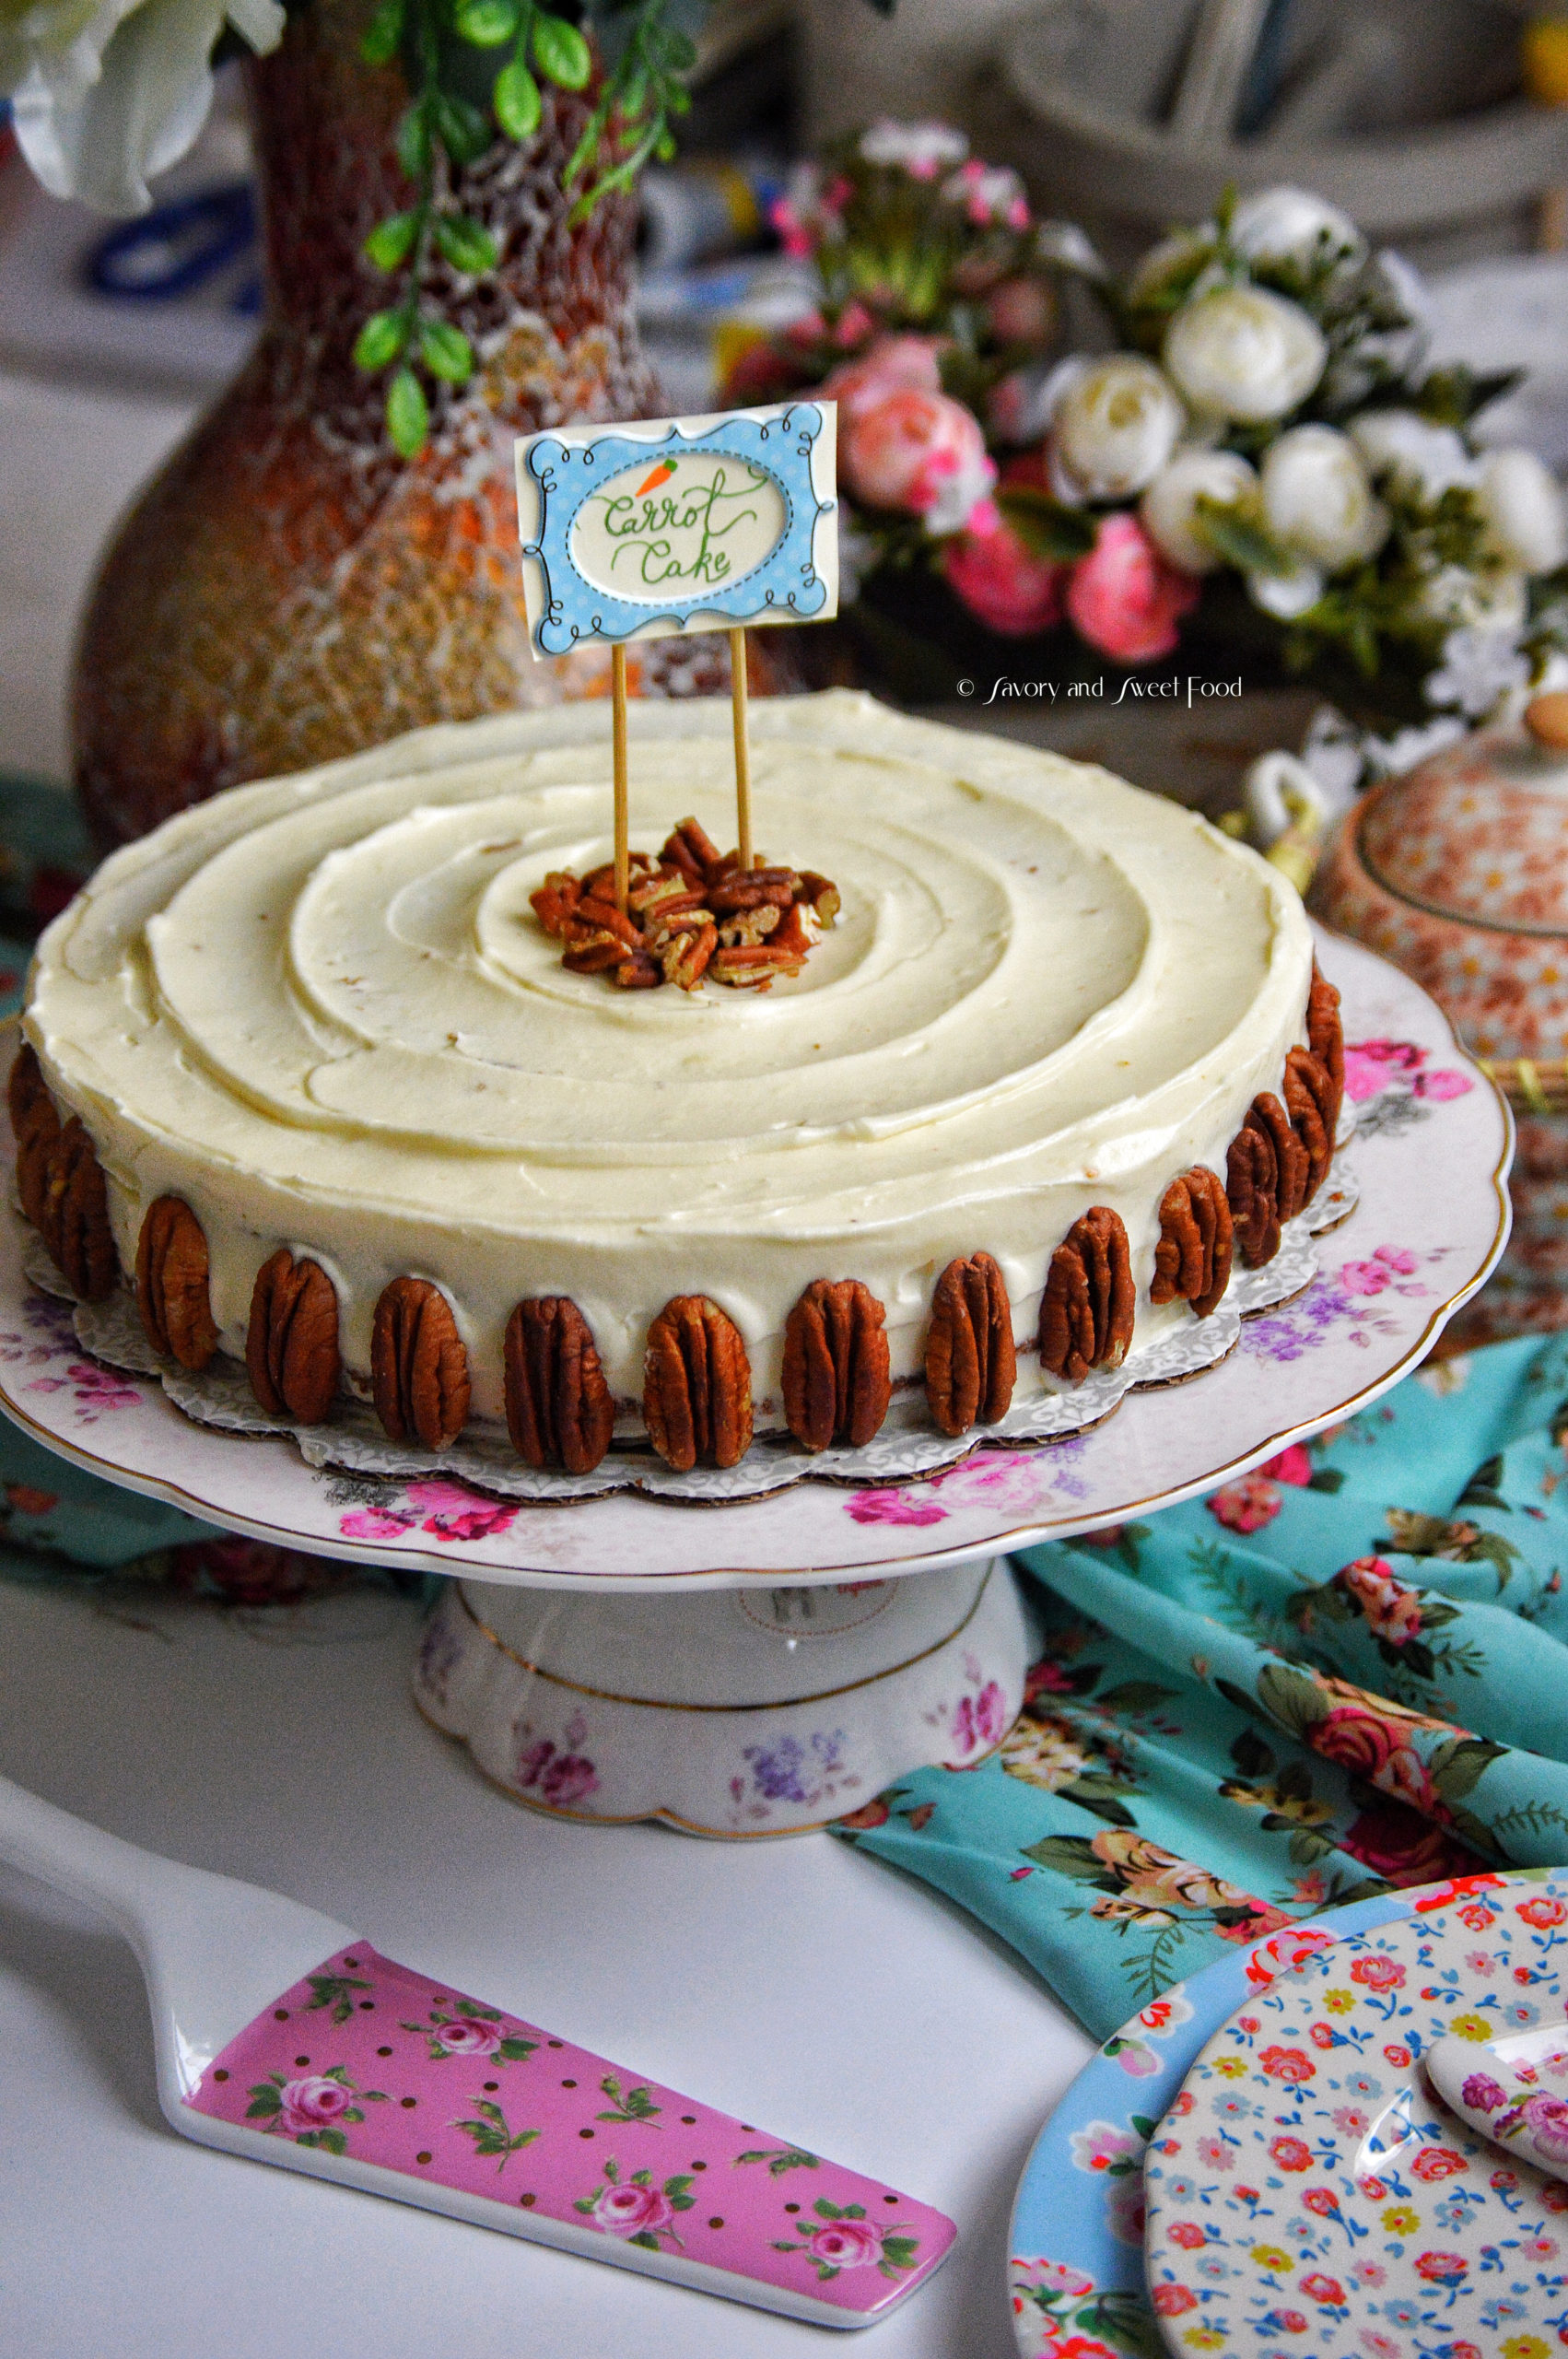 Classic Carrot Cake with Passionfruit Brown Butter Frosting